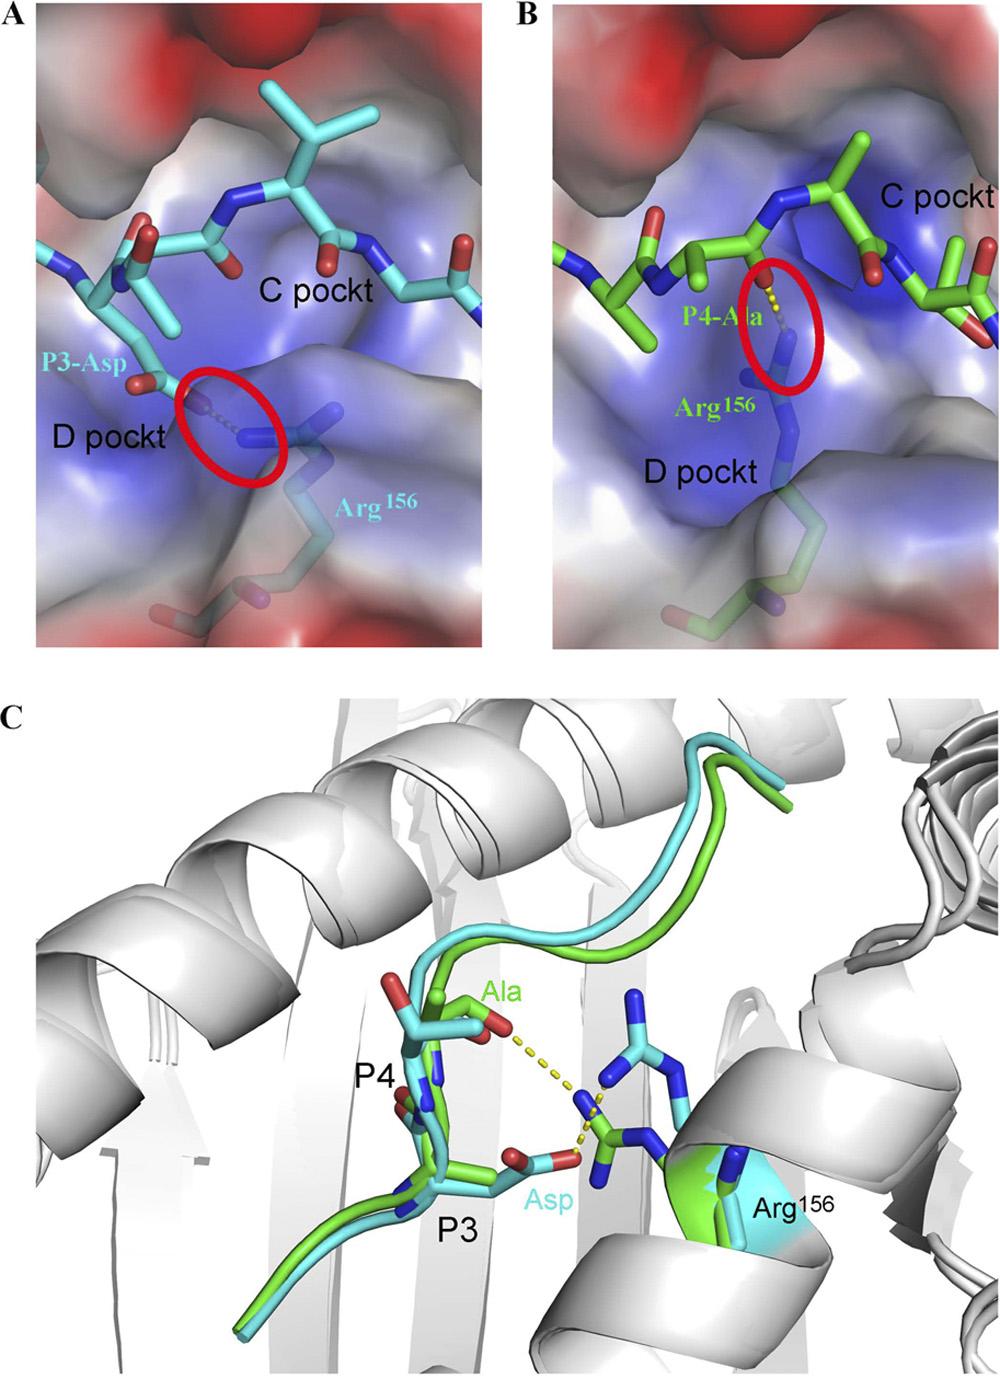 11716 ZHANG ET AL. J. VIROL. that, as in HLA-A*1101, pocket B of psla-1*0401 is able to accommodate residues with neutral side chains (Ser, Thr, Ala, Ile, Leu, Met, or Val) at P2 (34).